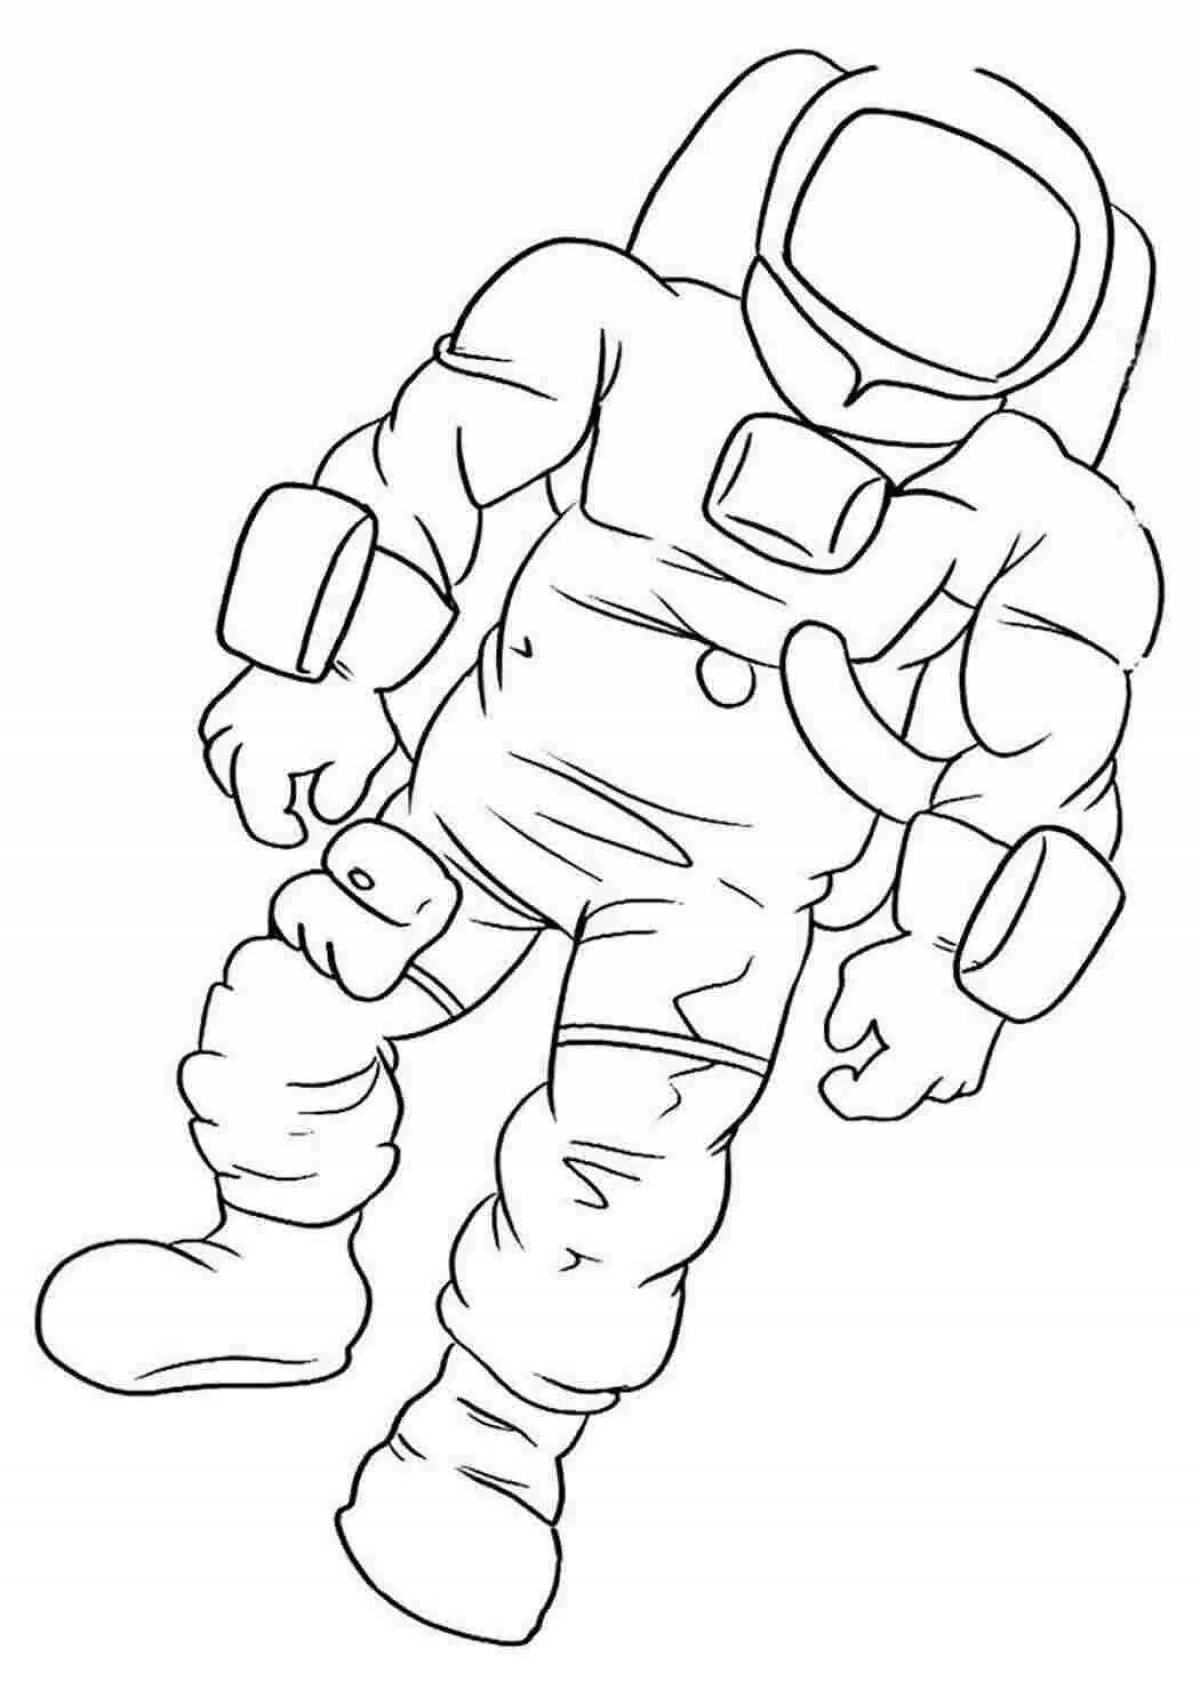 Fearless spacesuit astronaut